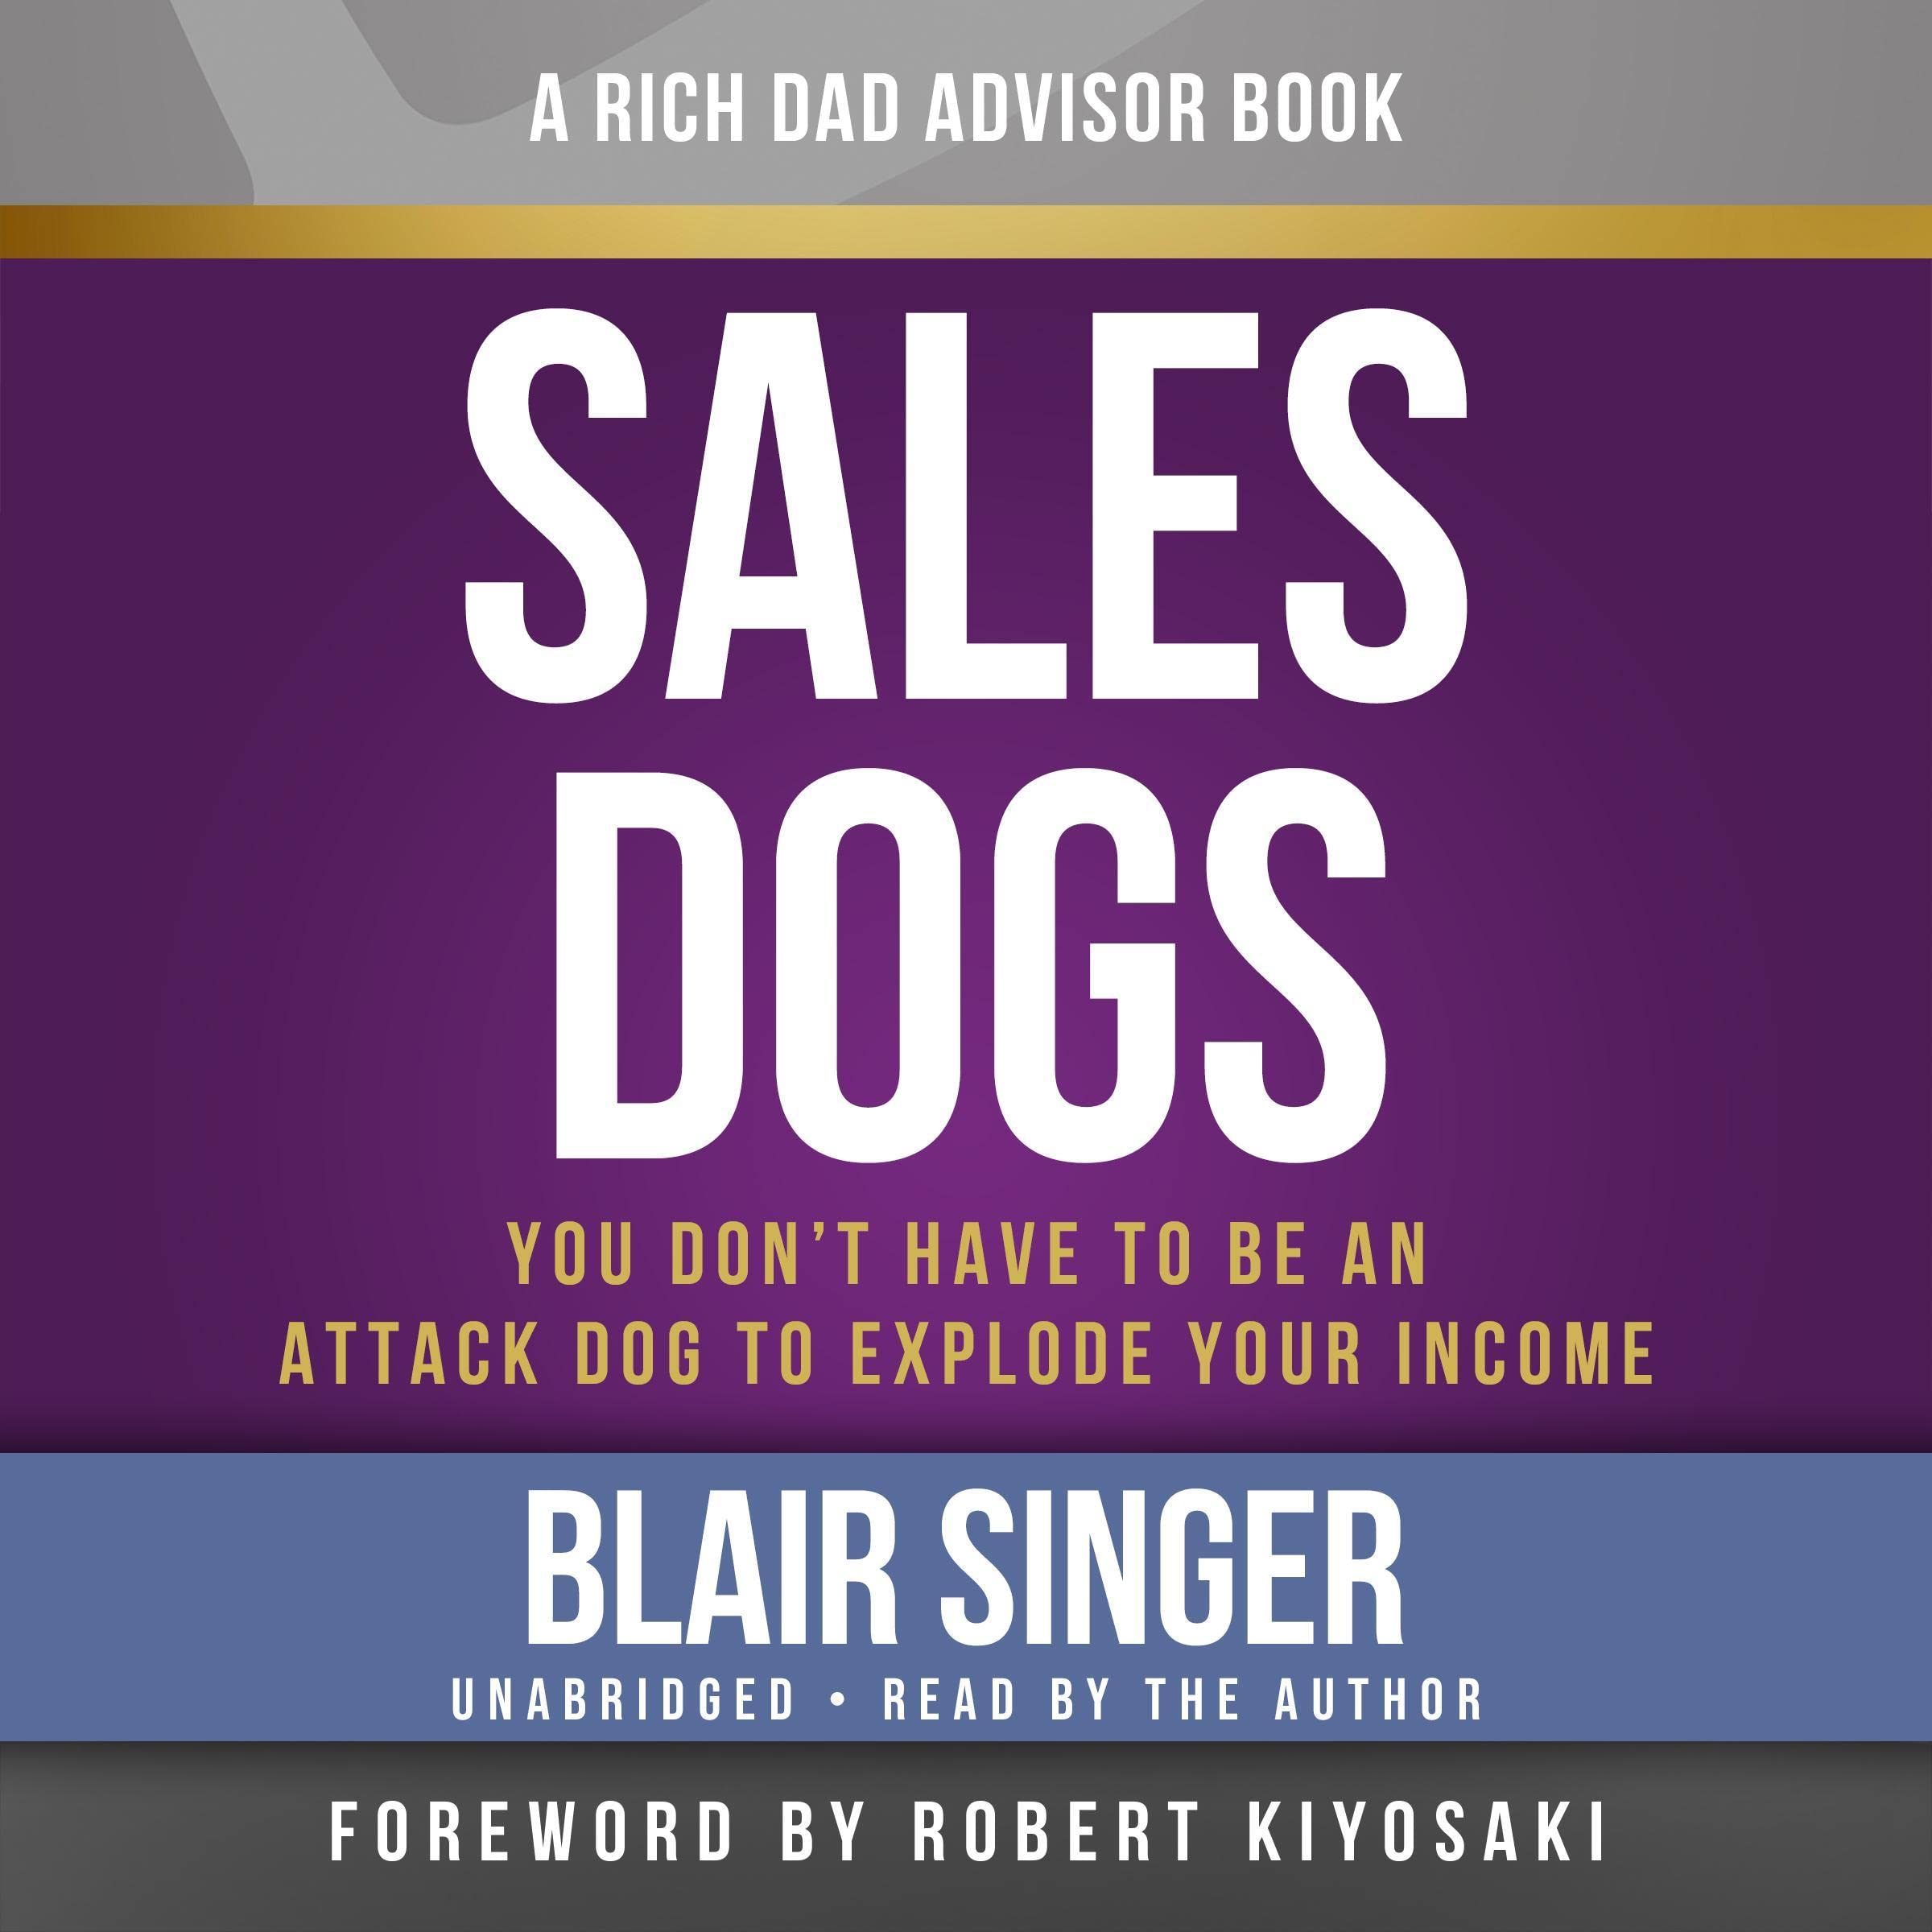 Rich Dad Advisors: Sales Dogs: You Don't Have to Be an Attack Dog to Explode Your Income